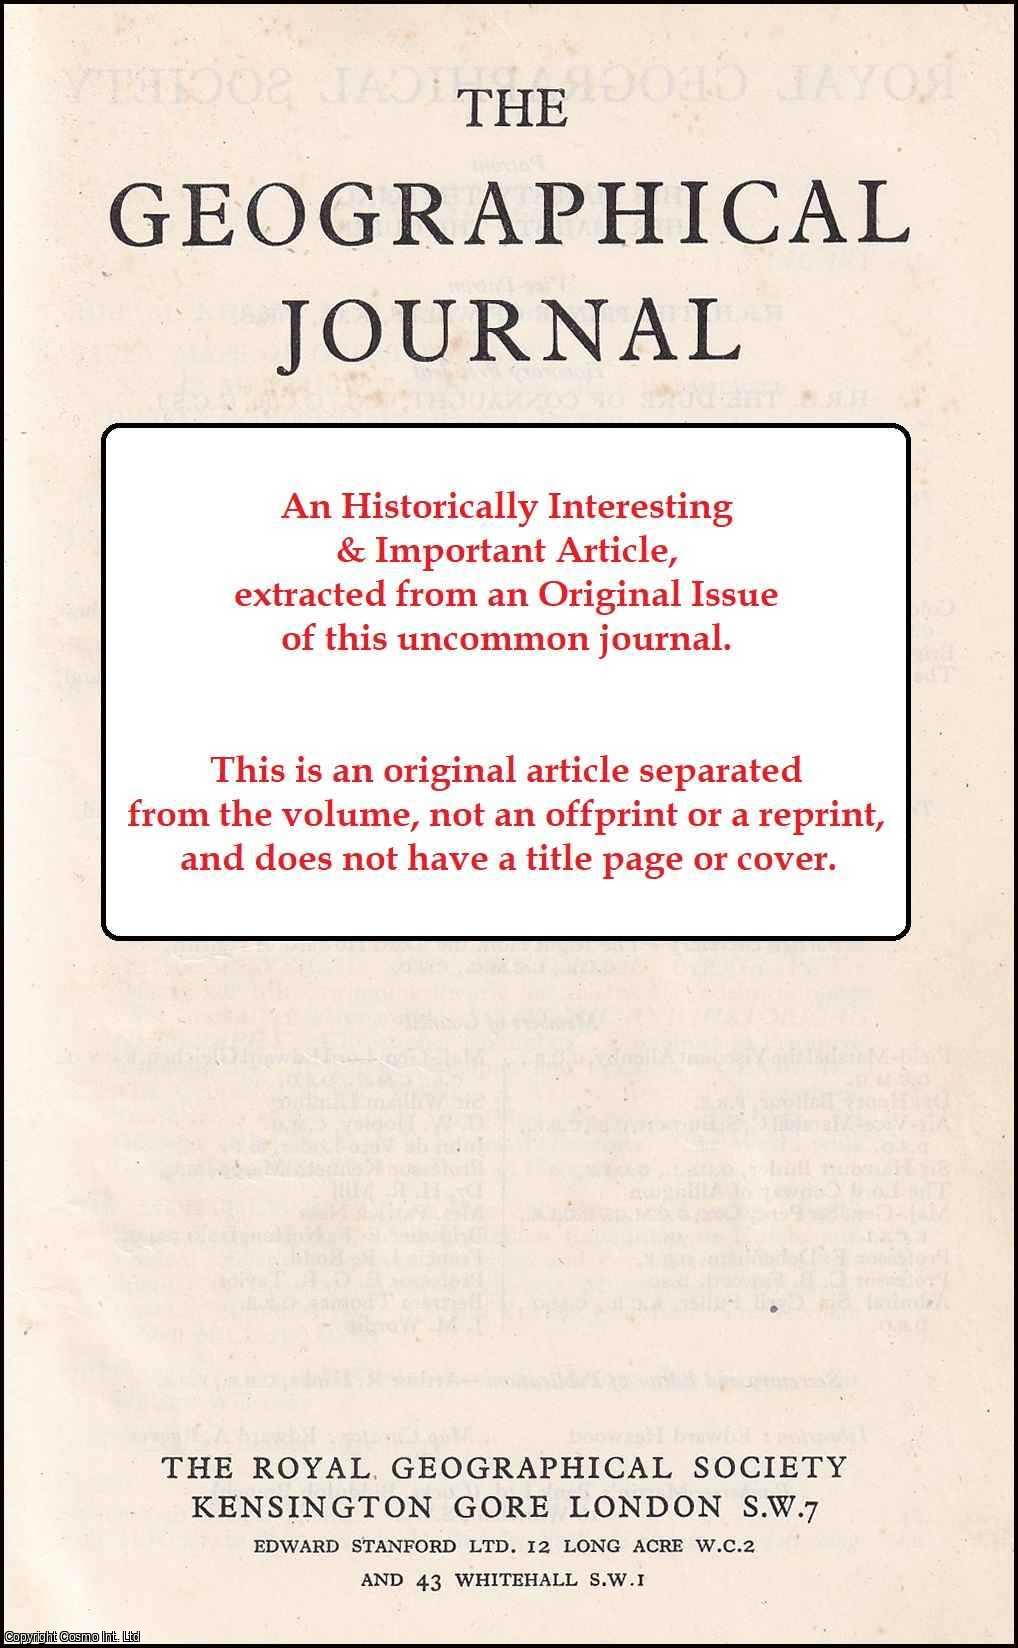 Francine M. R. Hughes - A Comment on The Impact of Development Schemes on The Floodplain Forests of The Tana River of Kenya. An original article from The Geographical Journal, 1984.